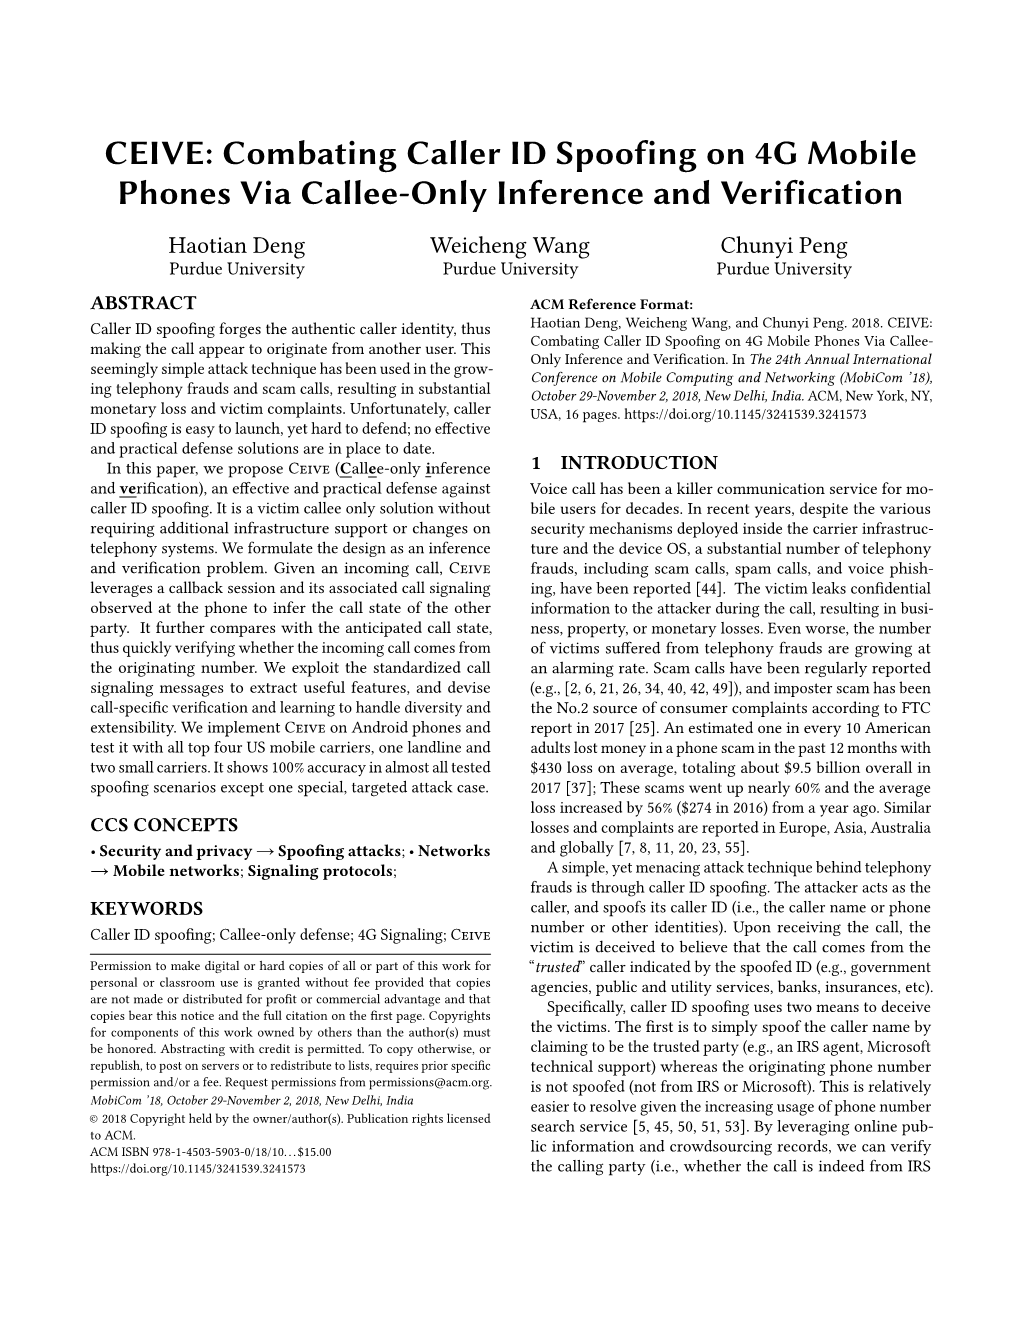 CEIVE: Combating Caller ID Spoofing on 4G Mobile Phones Via Callee